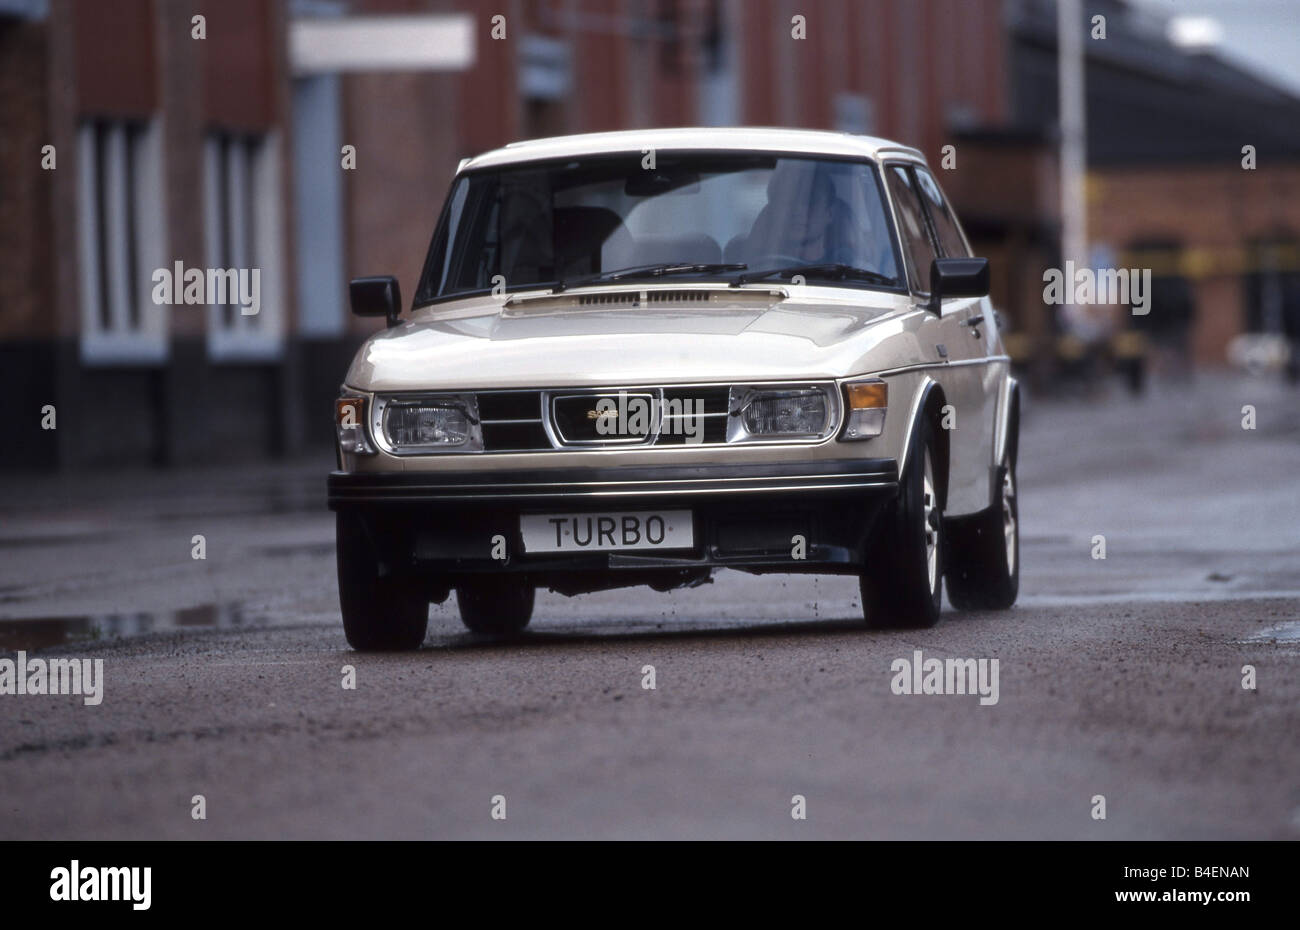 Car, Saab 99 turbo, white, old car, driving, diagonal front, front view, photographer: Reinhard Mutschler Stock Photo